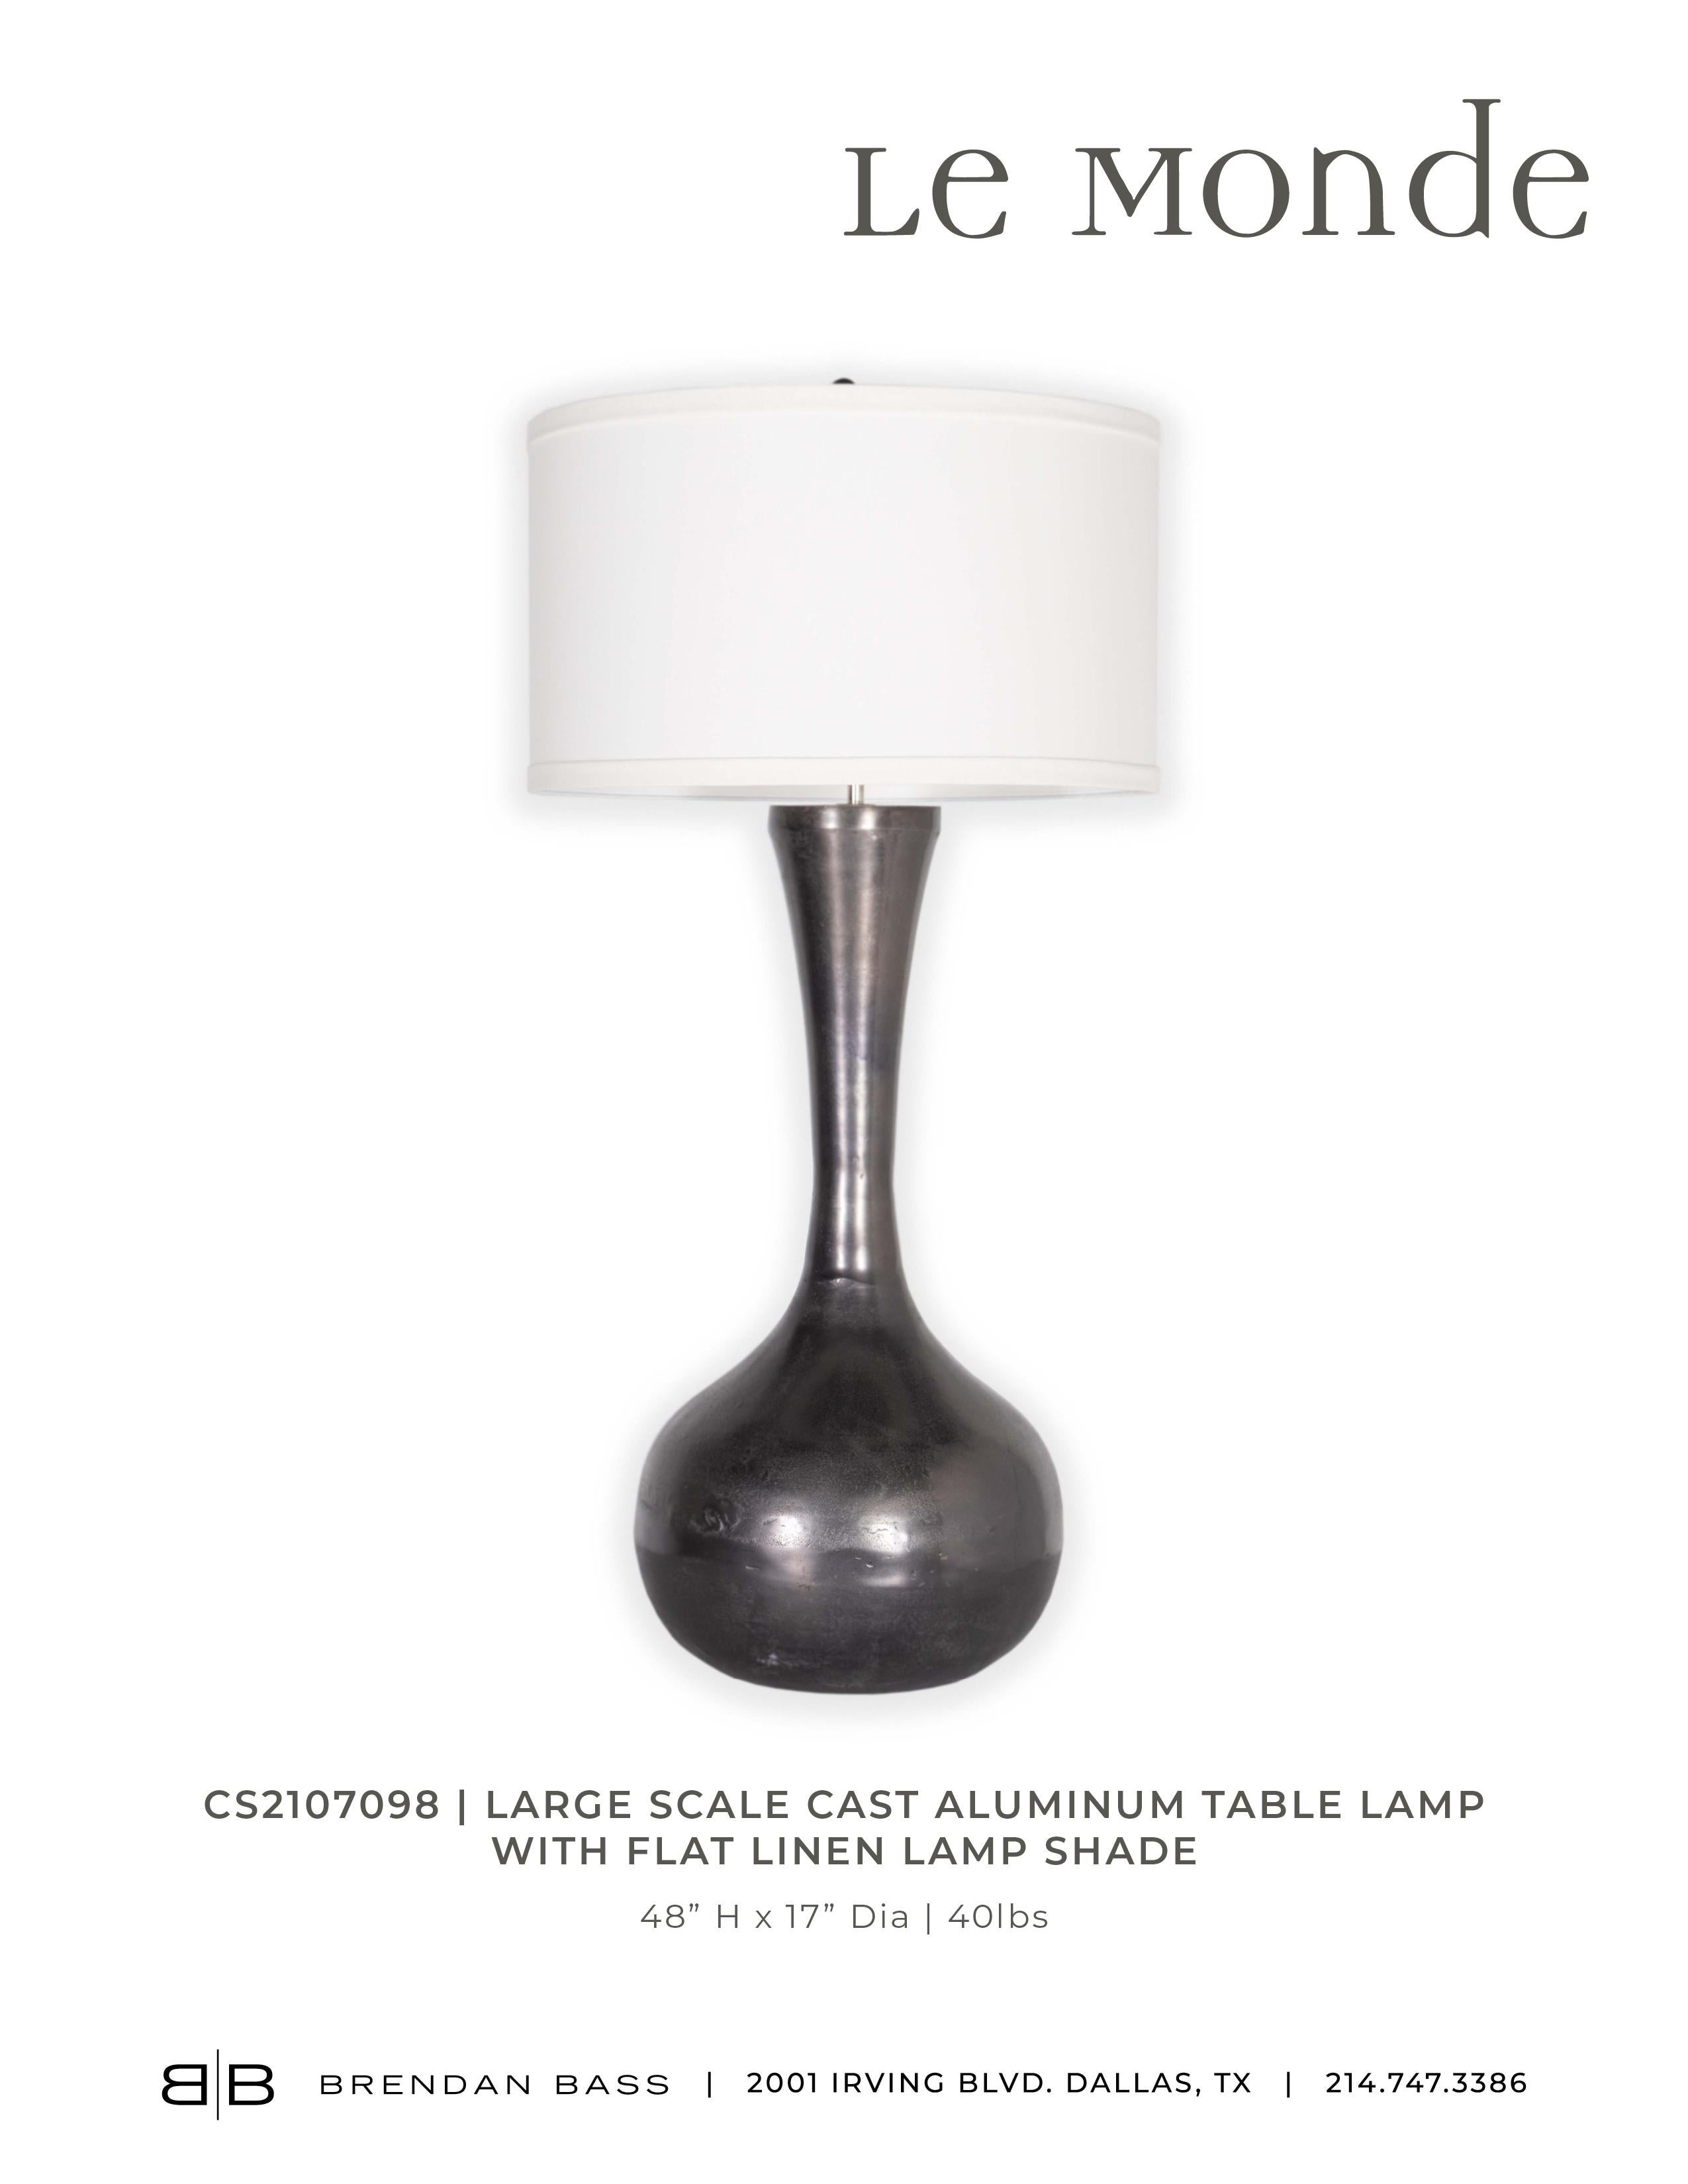 Hand-Crafted Large Scale Cast Aluminum Lamp with Flat Linen Lamp Shade